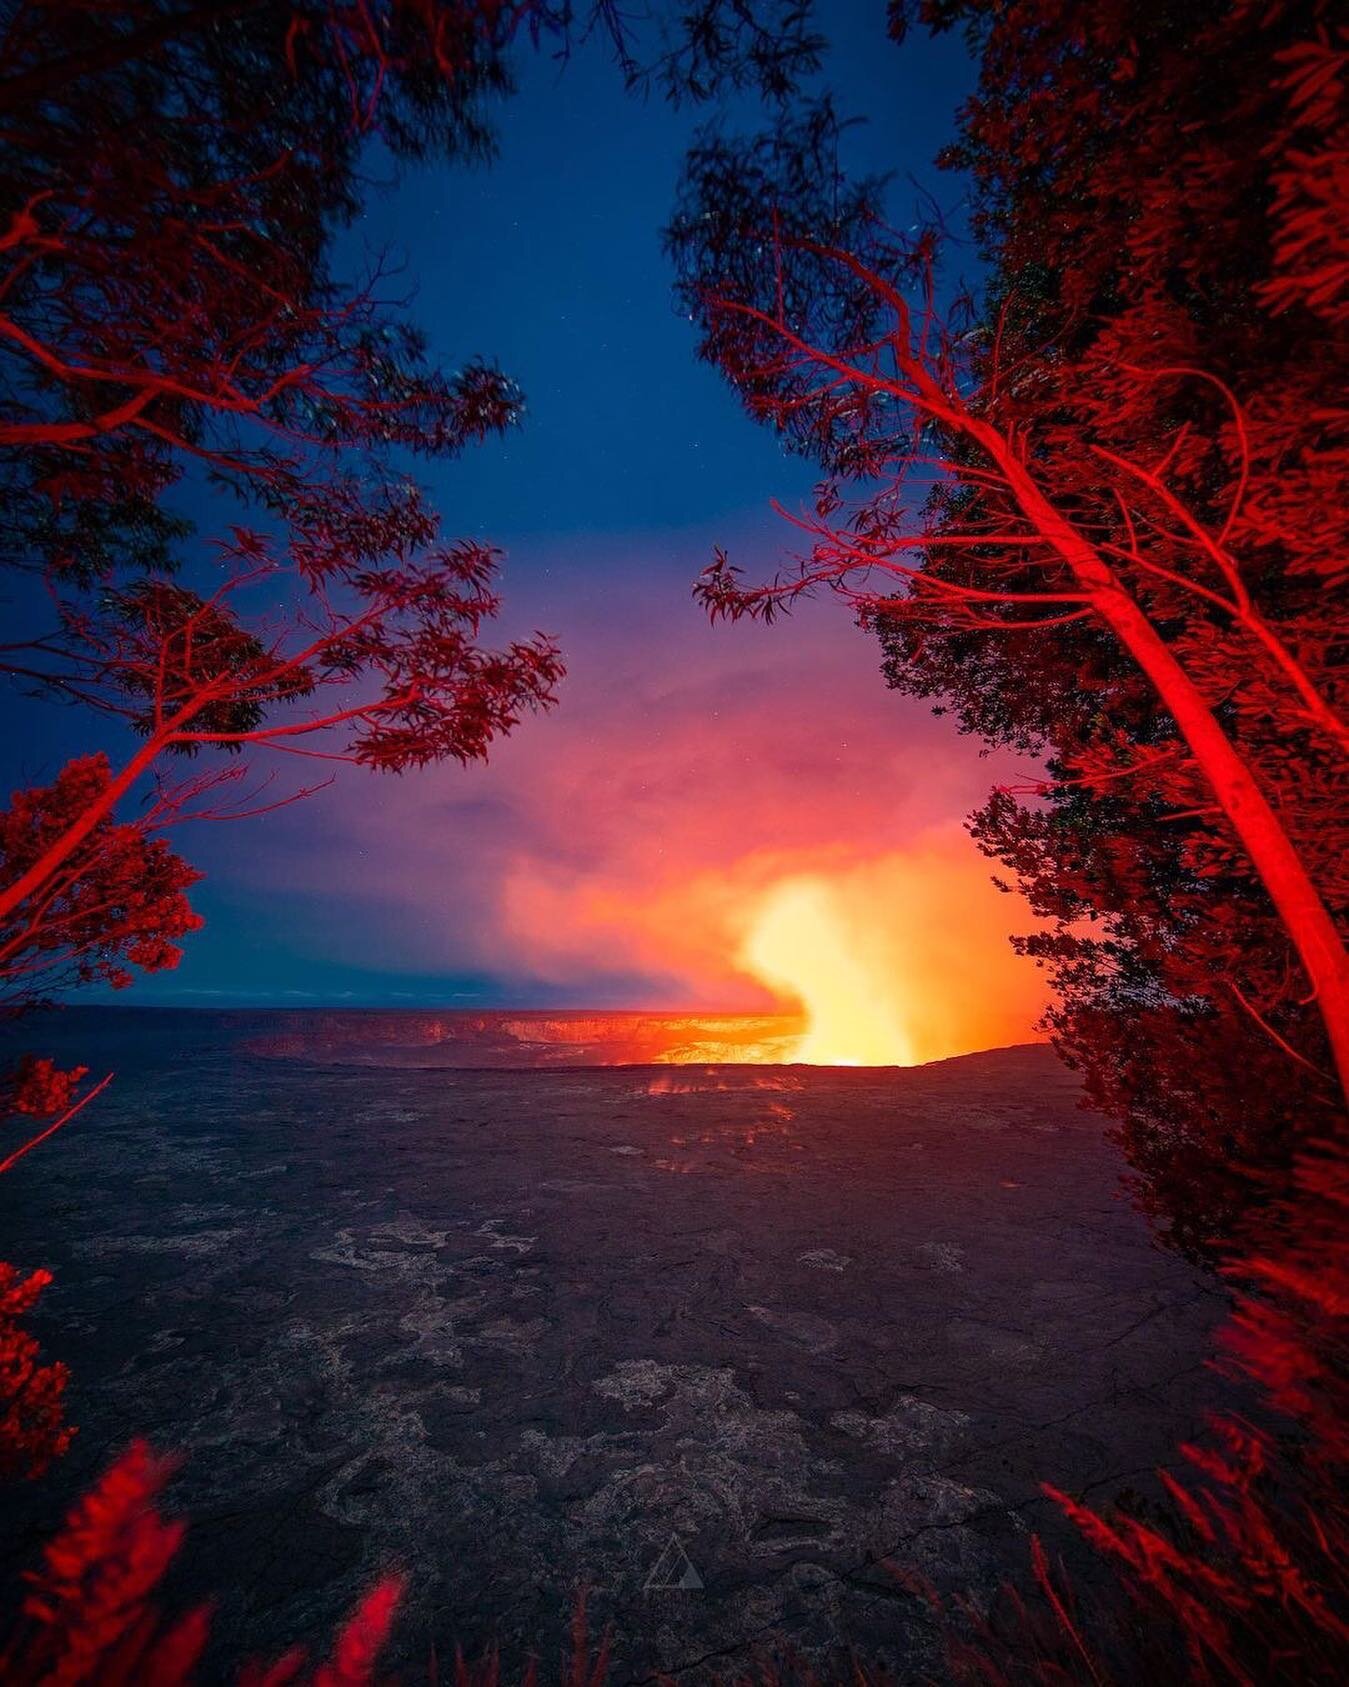 ⭐️2021!⭐️ We took a much needed break over the holidays to spend time with friends and family, but we&rsquo;re back and ready to celebrate a new year! 

The holidays also brought us a new eruption from Madam Pele at Kilauea, captured here by amazing 